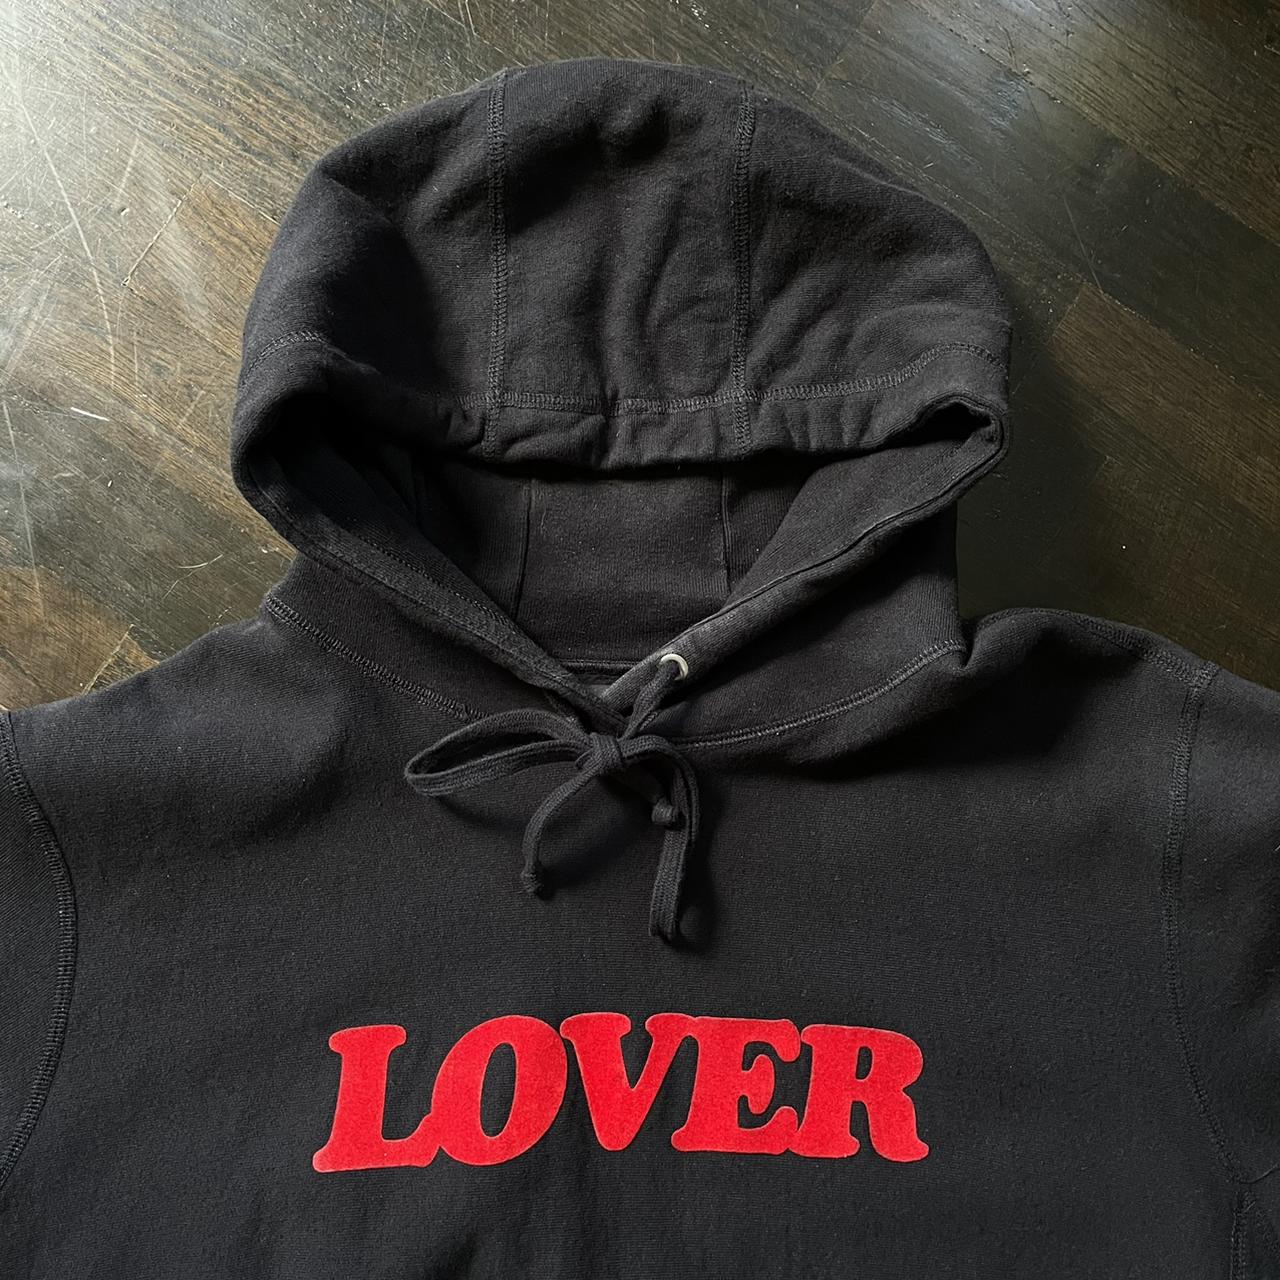 Bianca Chandon “LOVER” hoodie in black/red, size XL....